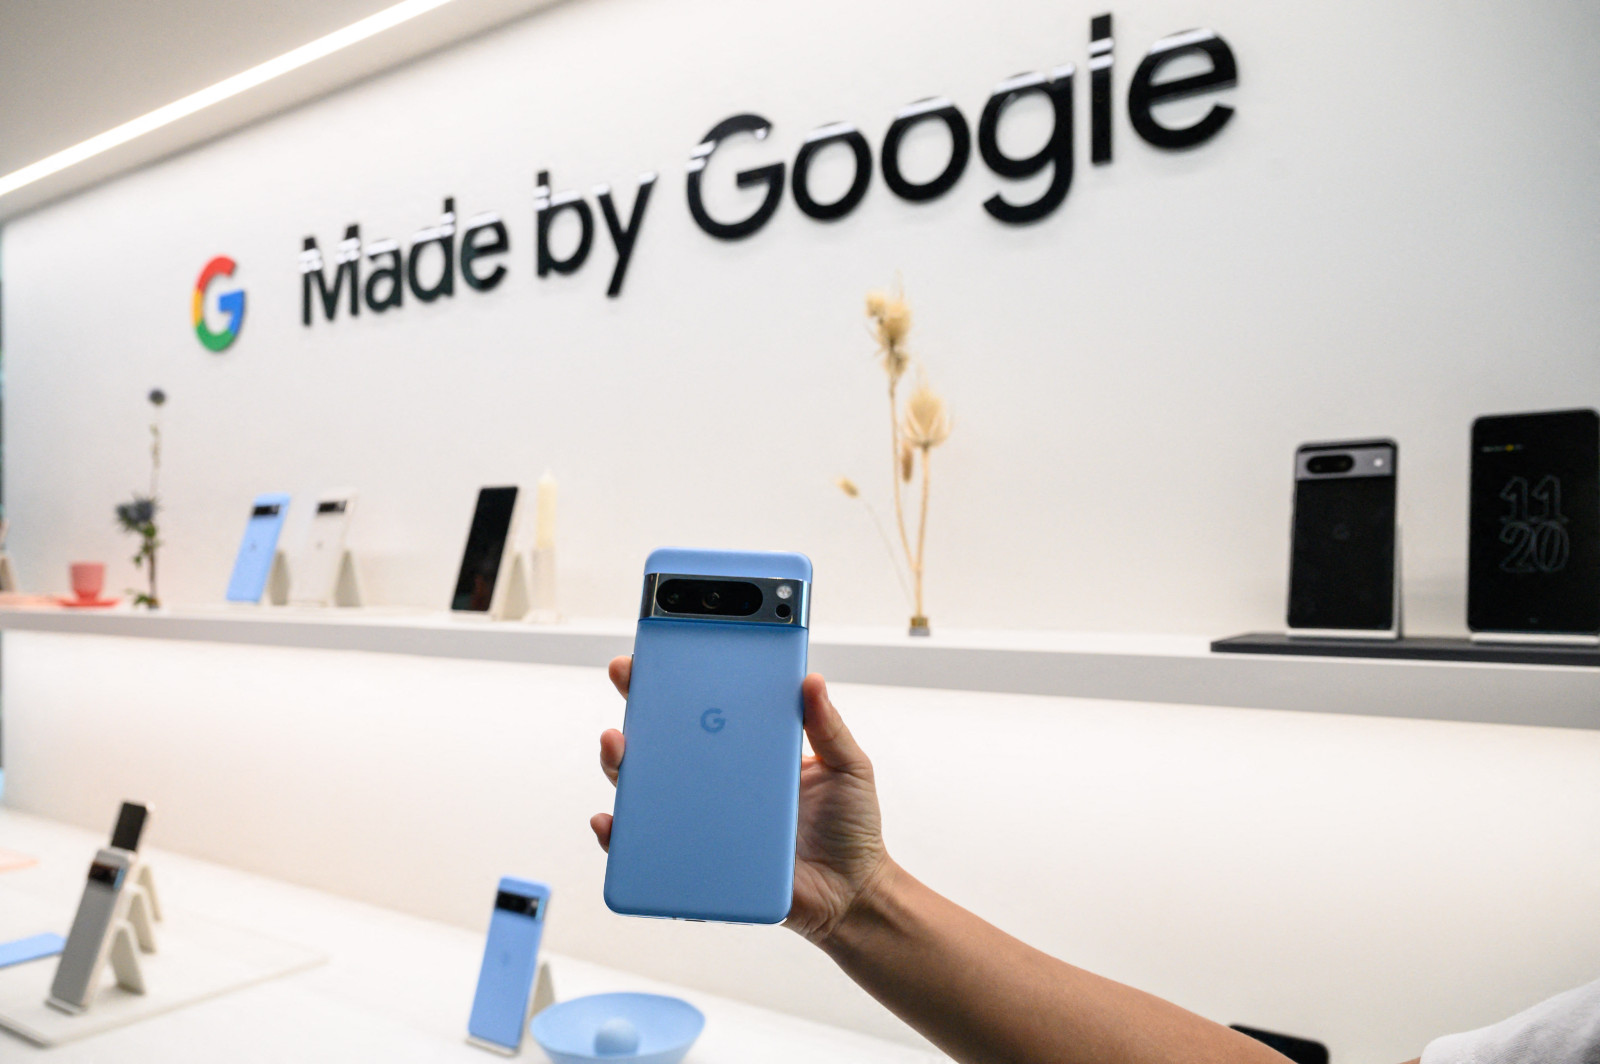 A hand holds a Pixel phone in a bright, white interior environment in front of a wall that says Made by Google